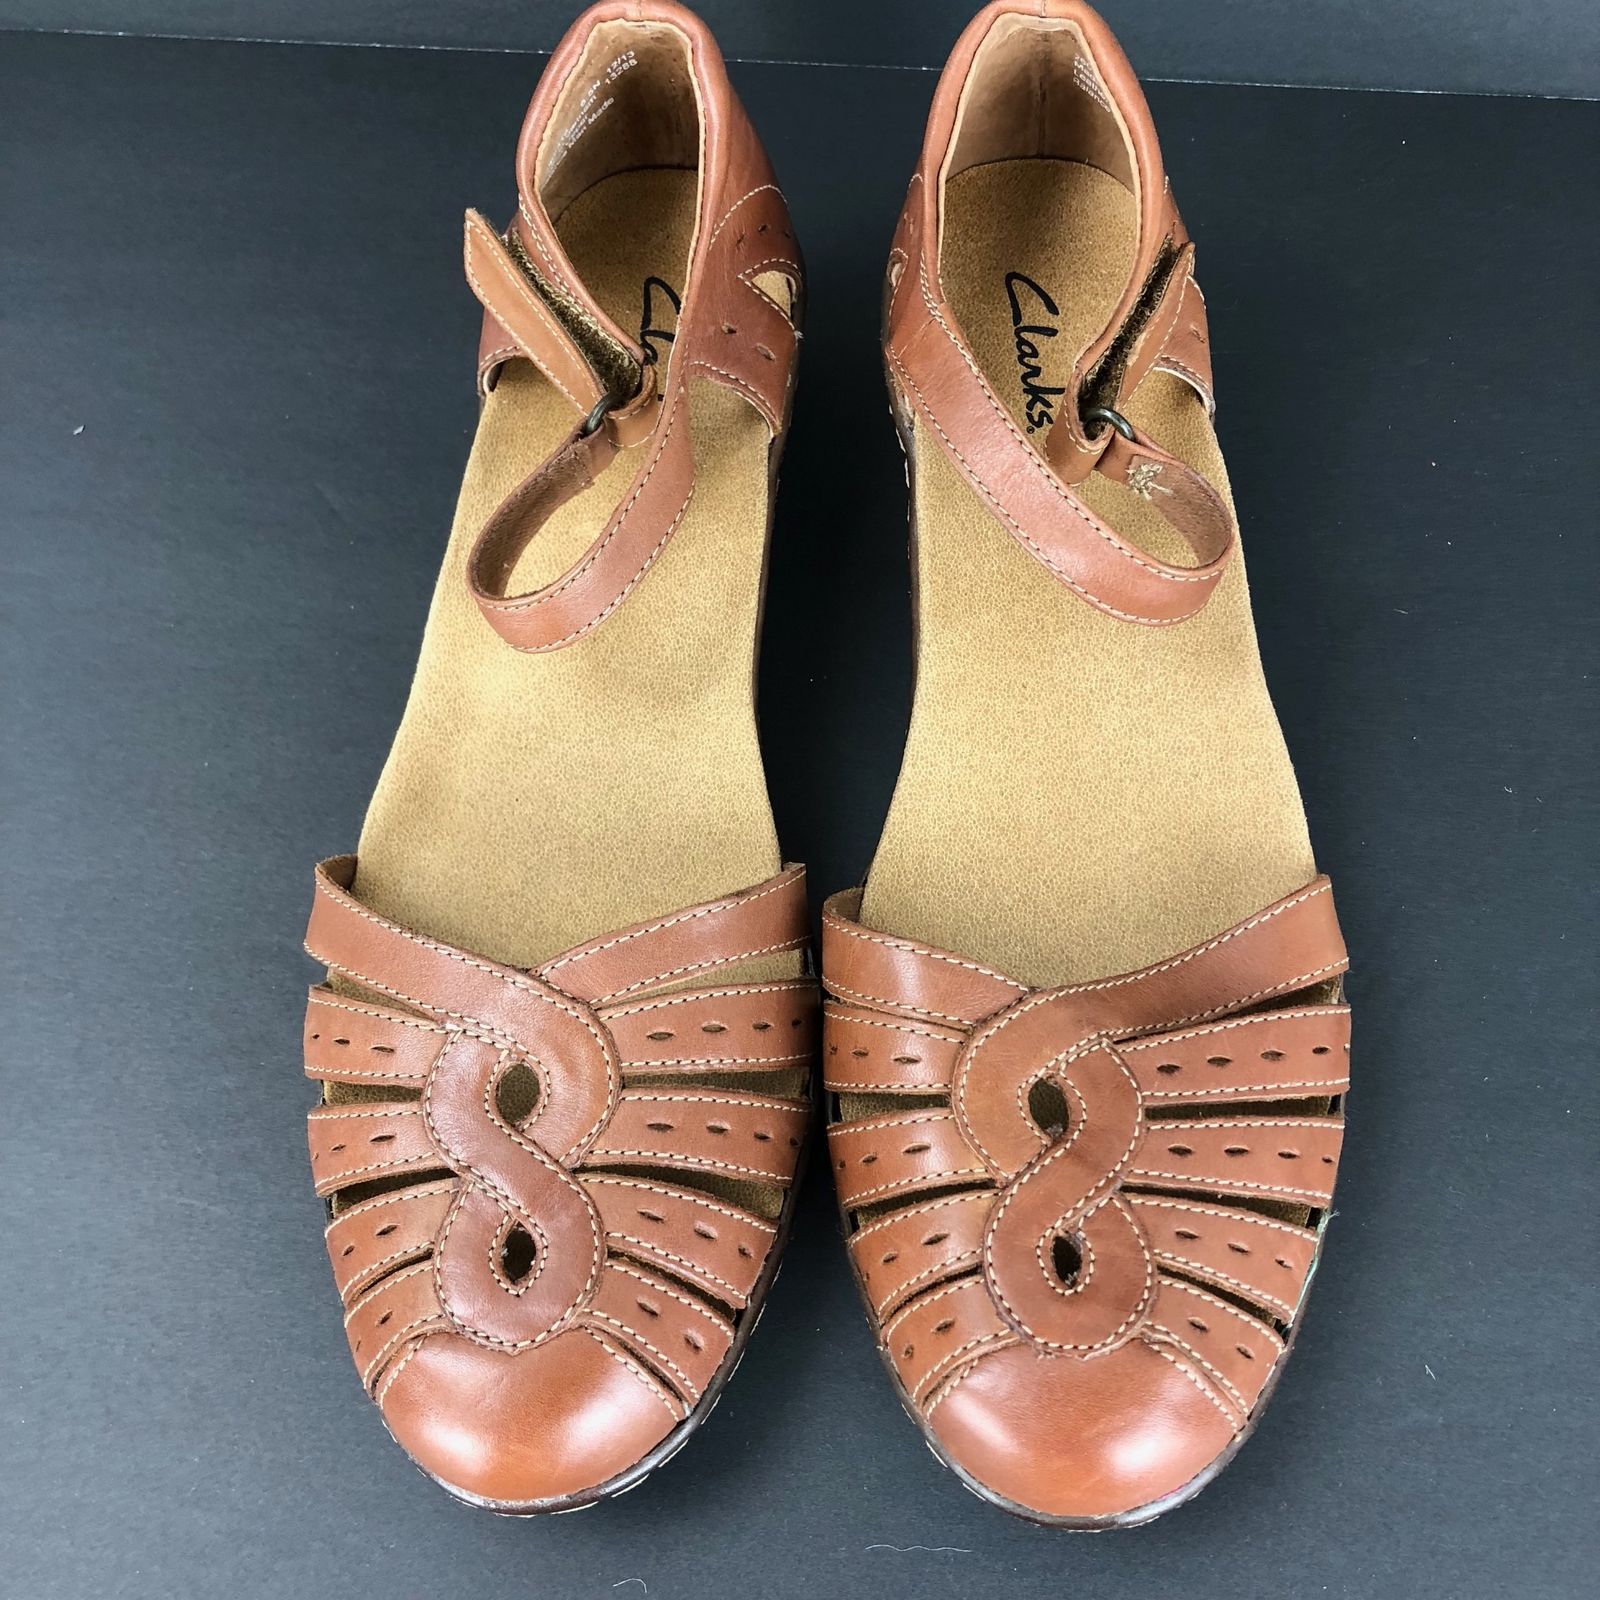 Clarks Tan Leather Soft Cushion Sandals Size 9.5 N Shoe Buckle Closed ...